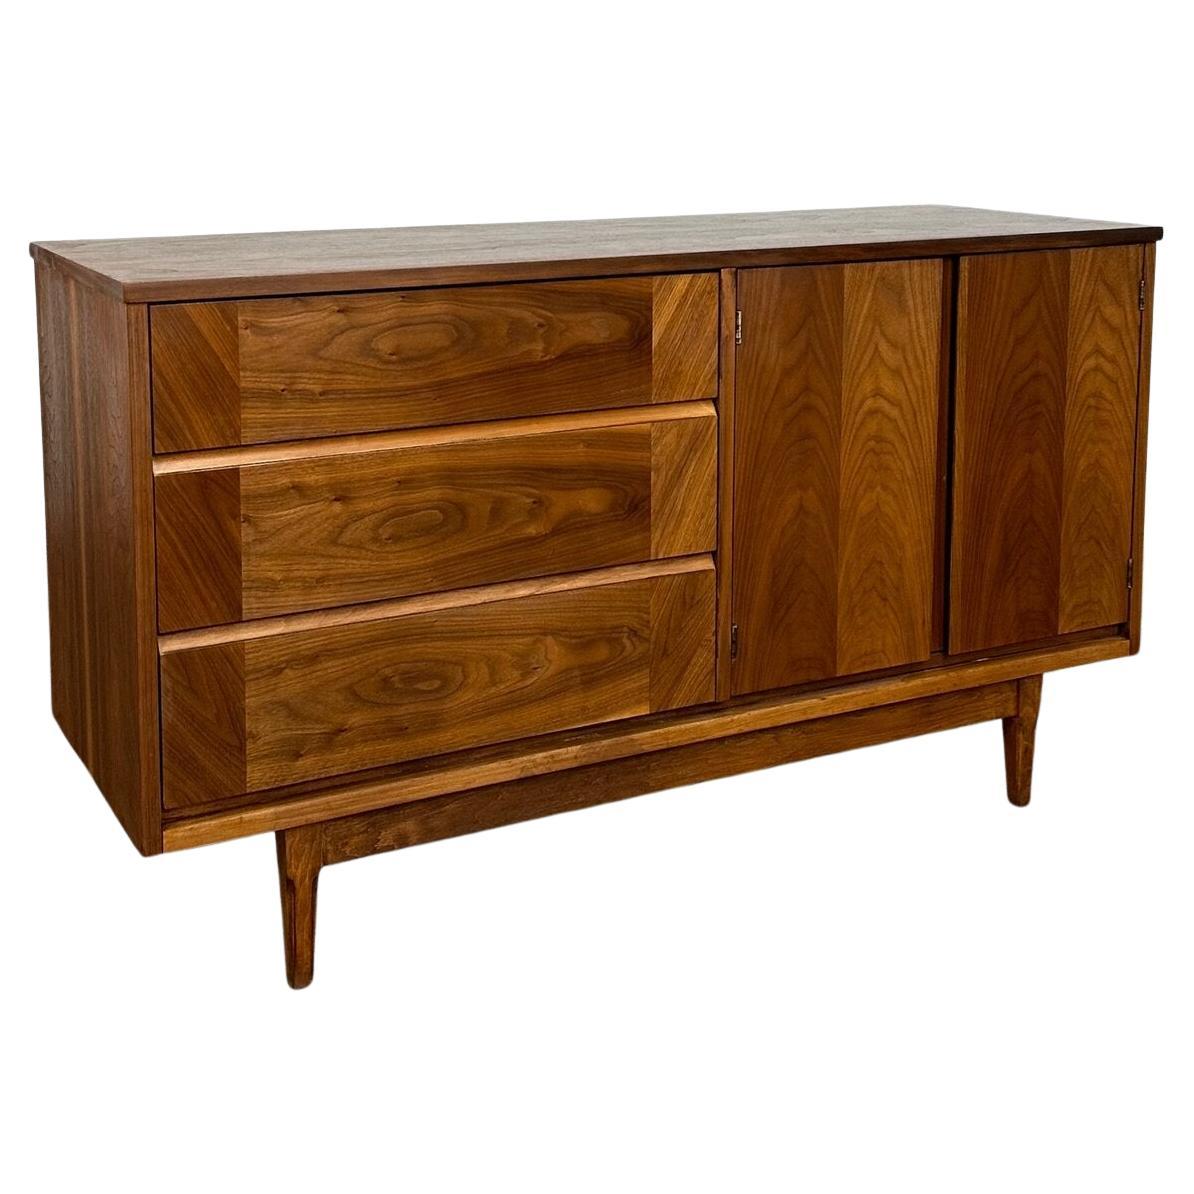 Compact Walnut Credenza by Basset